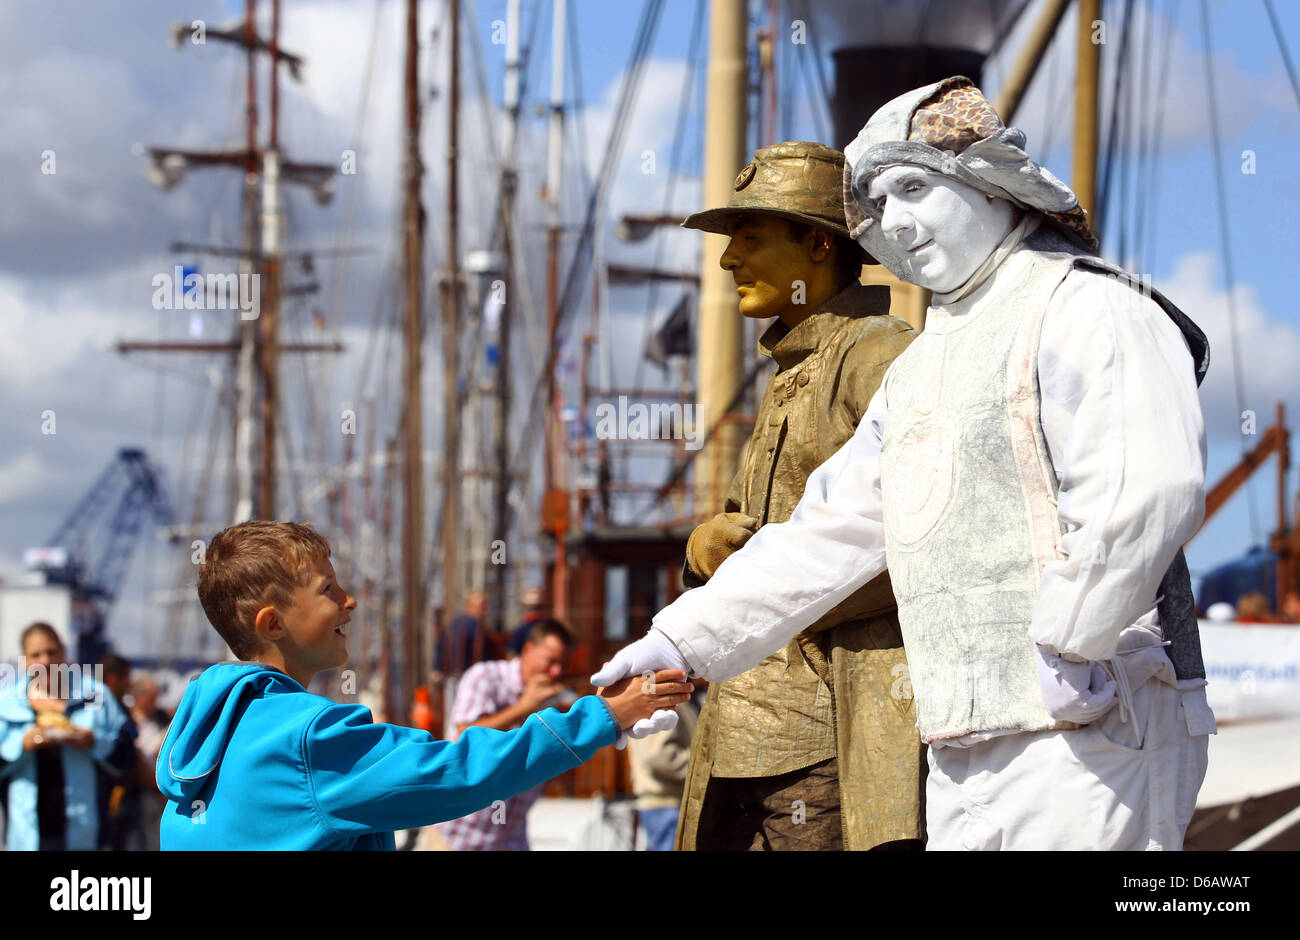 Artists welcome visitors of the 22nd Hanse Sail festival in the harbour in Rostock, Germany, 09 August 2012. The maritime festival runs from 09 until 12 August 2012 and features 170 traditional and museum ships. Photo: Jens Buettner Stock Photo